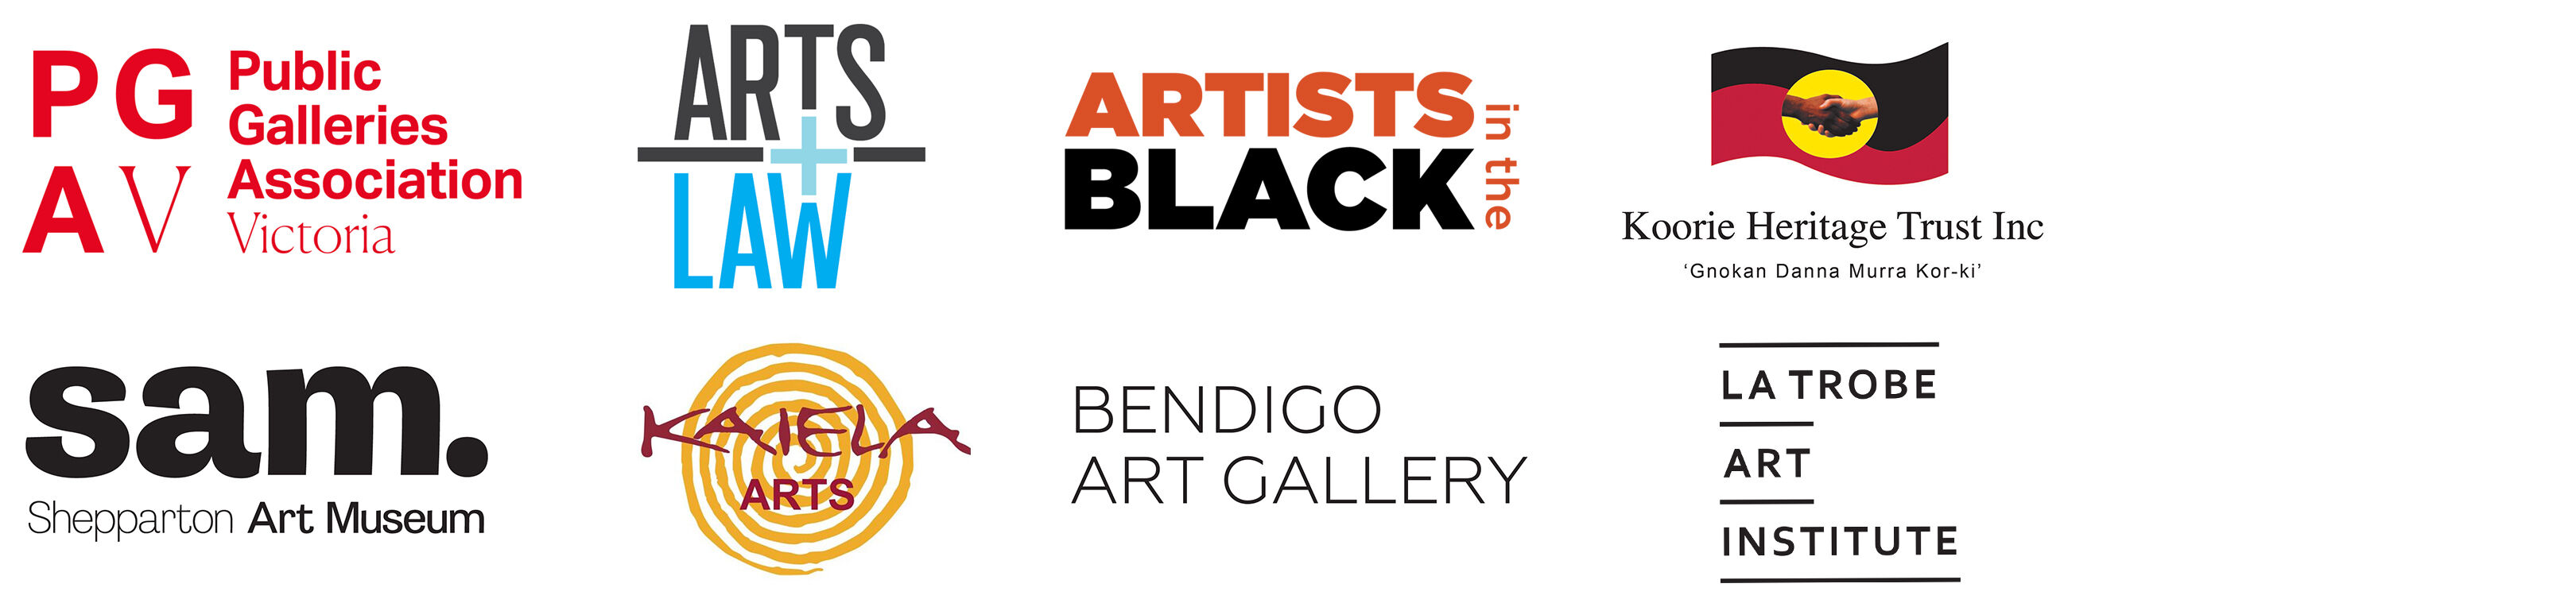 Artists in the Black Presenting Partners no WAG with LAI web